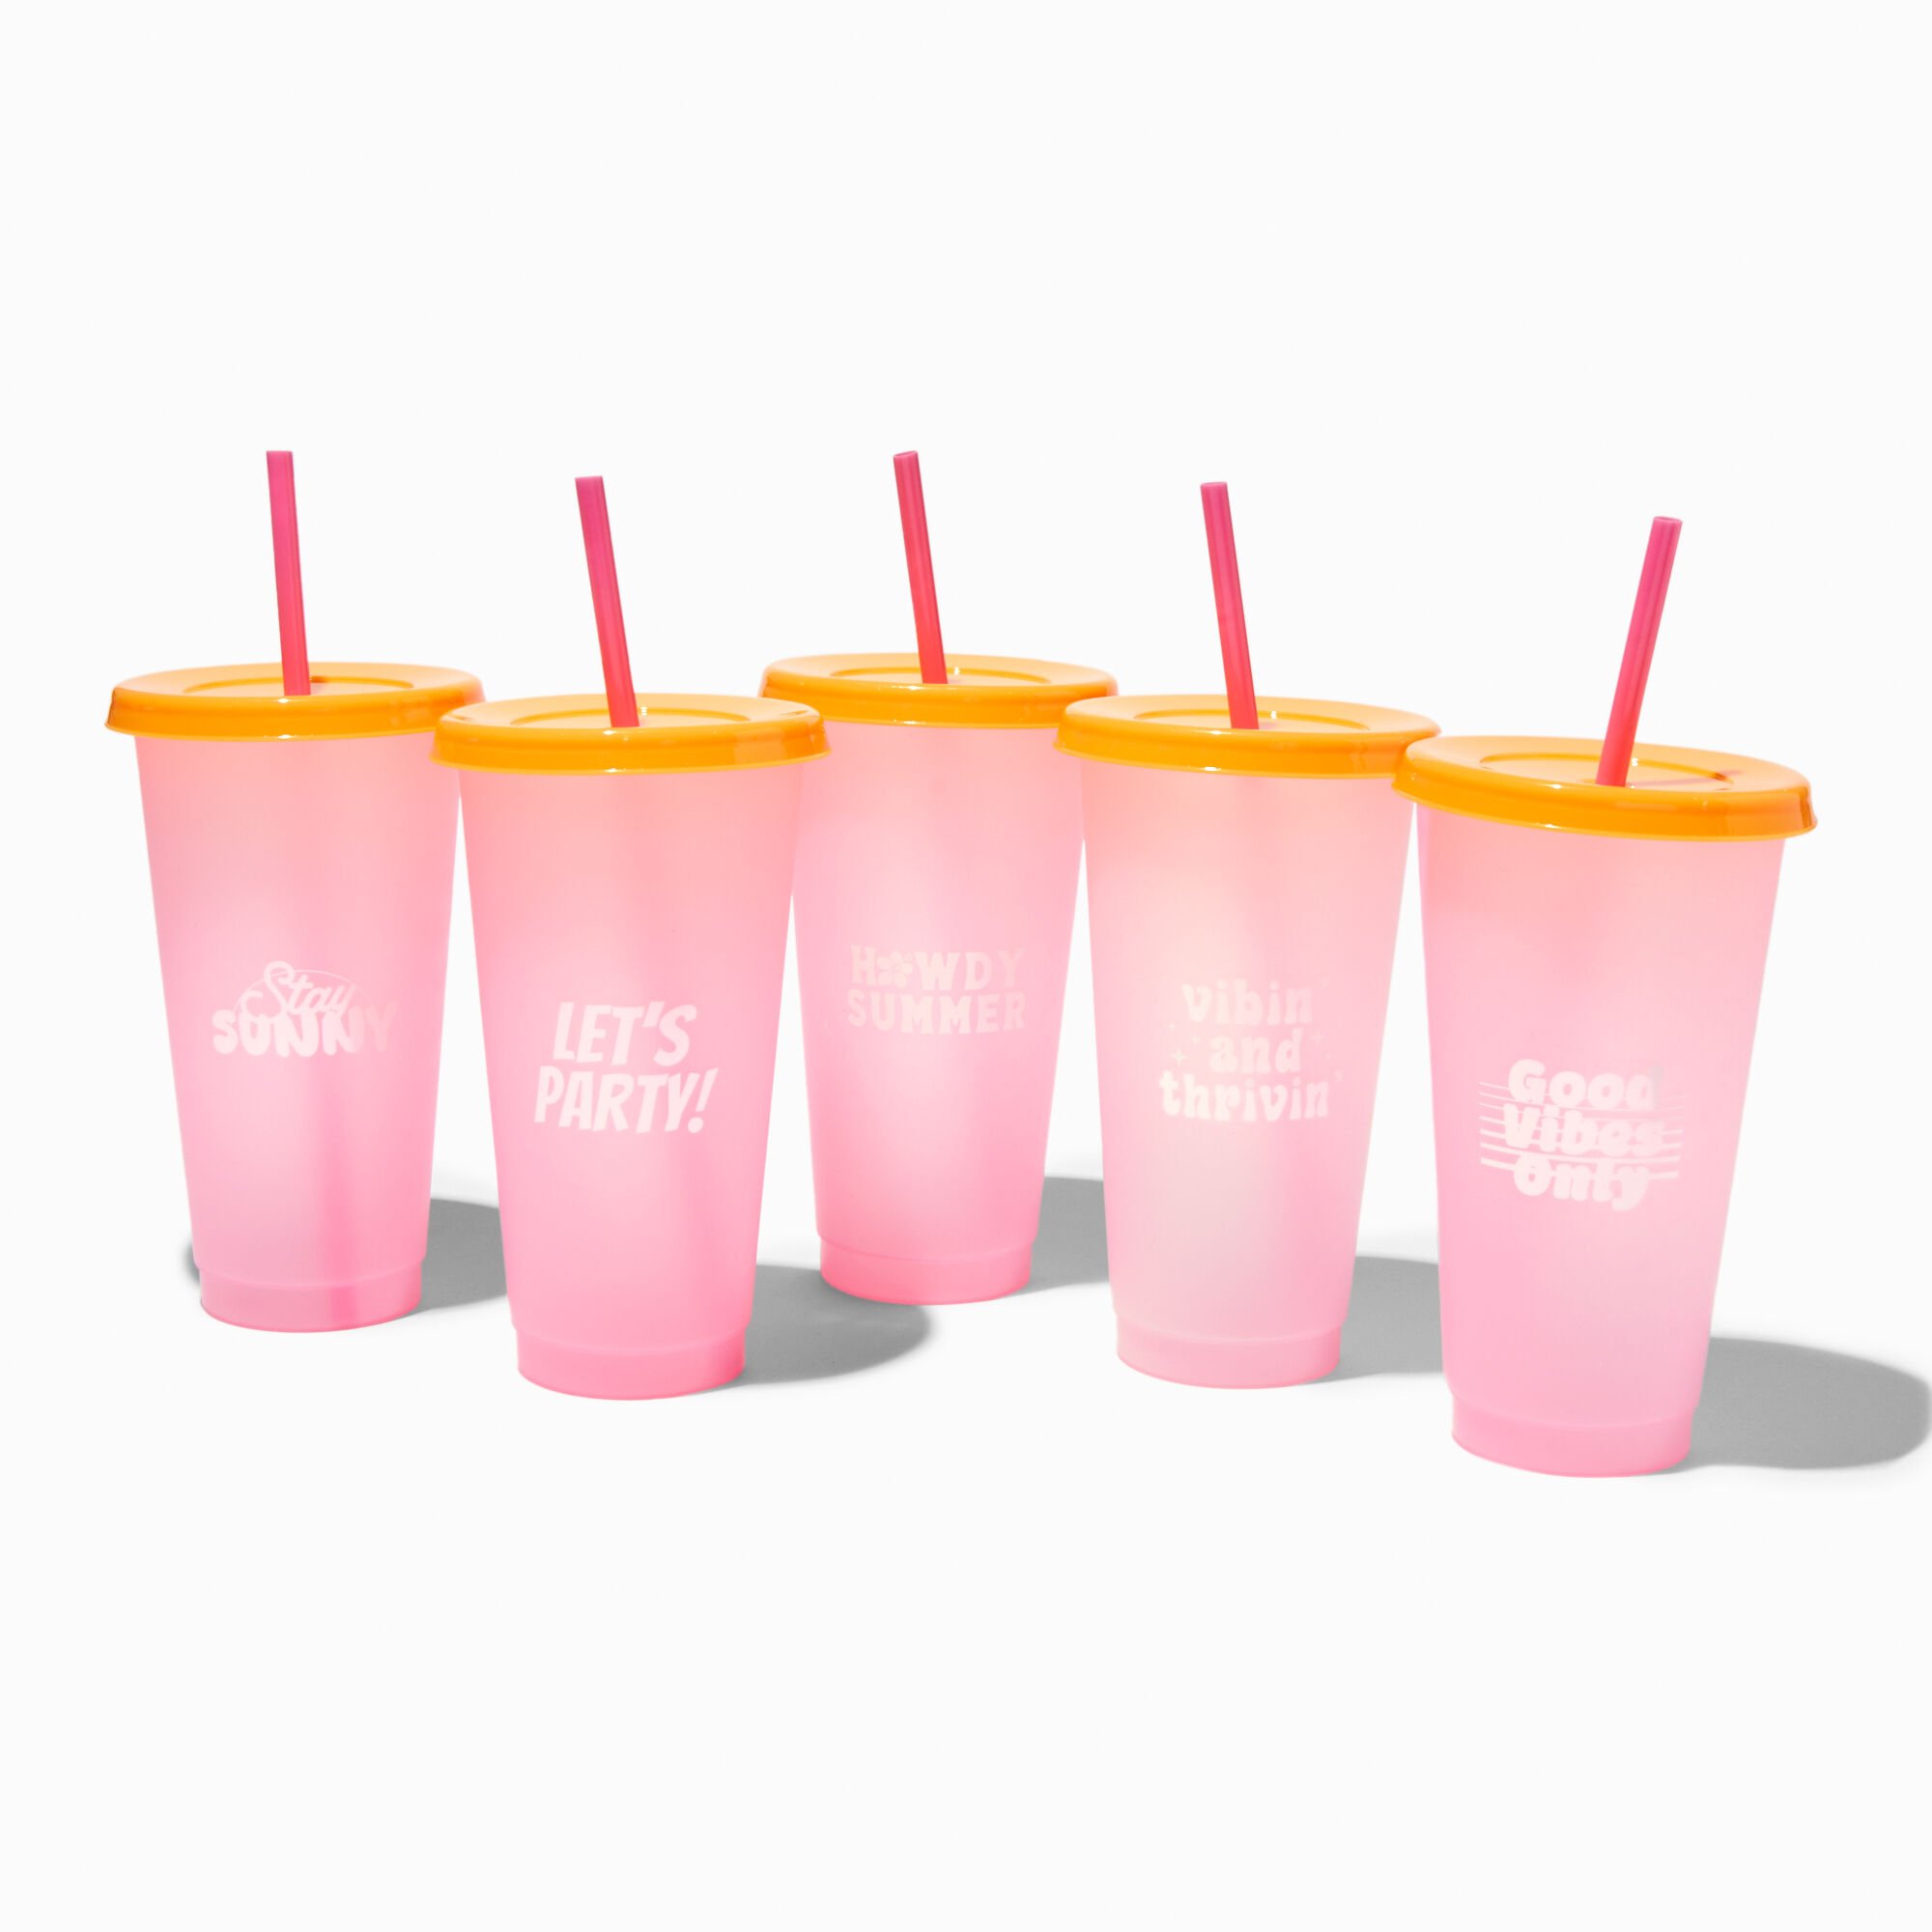 View Claires ColorChanging Party Tumbler Set 5 Pack information